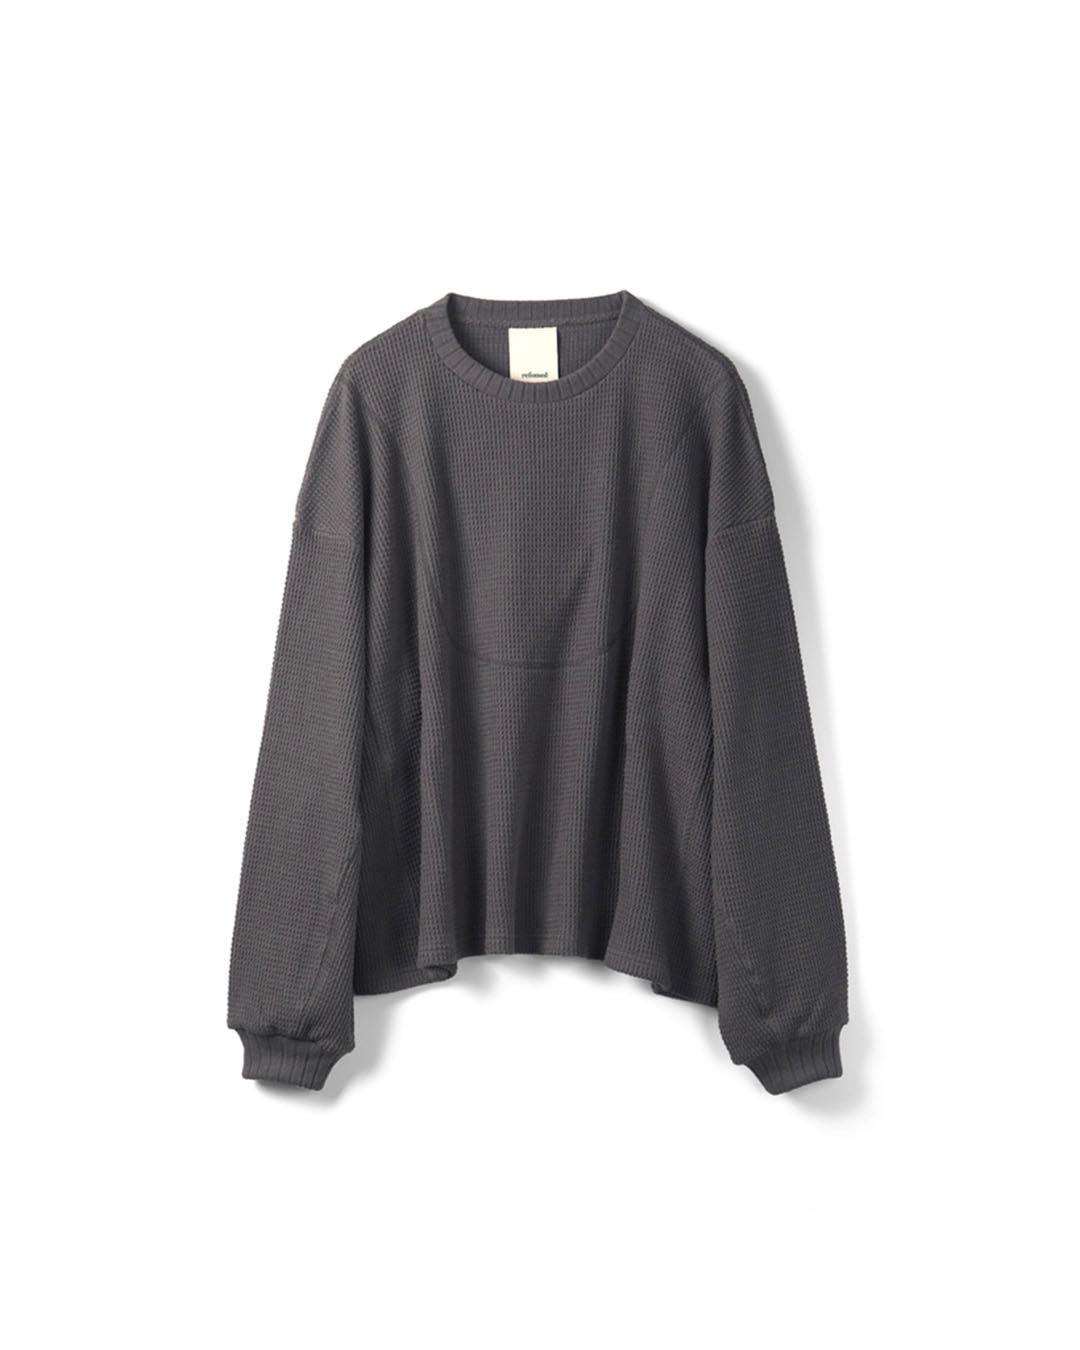 【REFOMED】AZEAMI THERMAL TEE - CHARCOAL